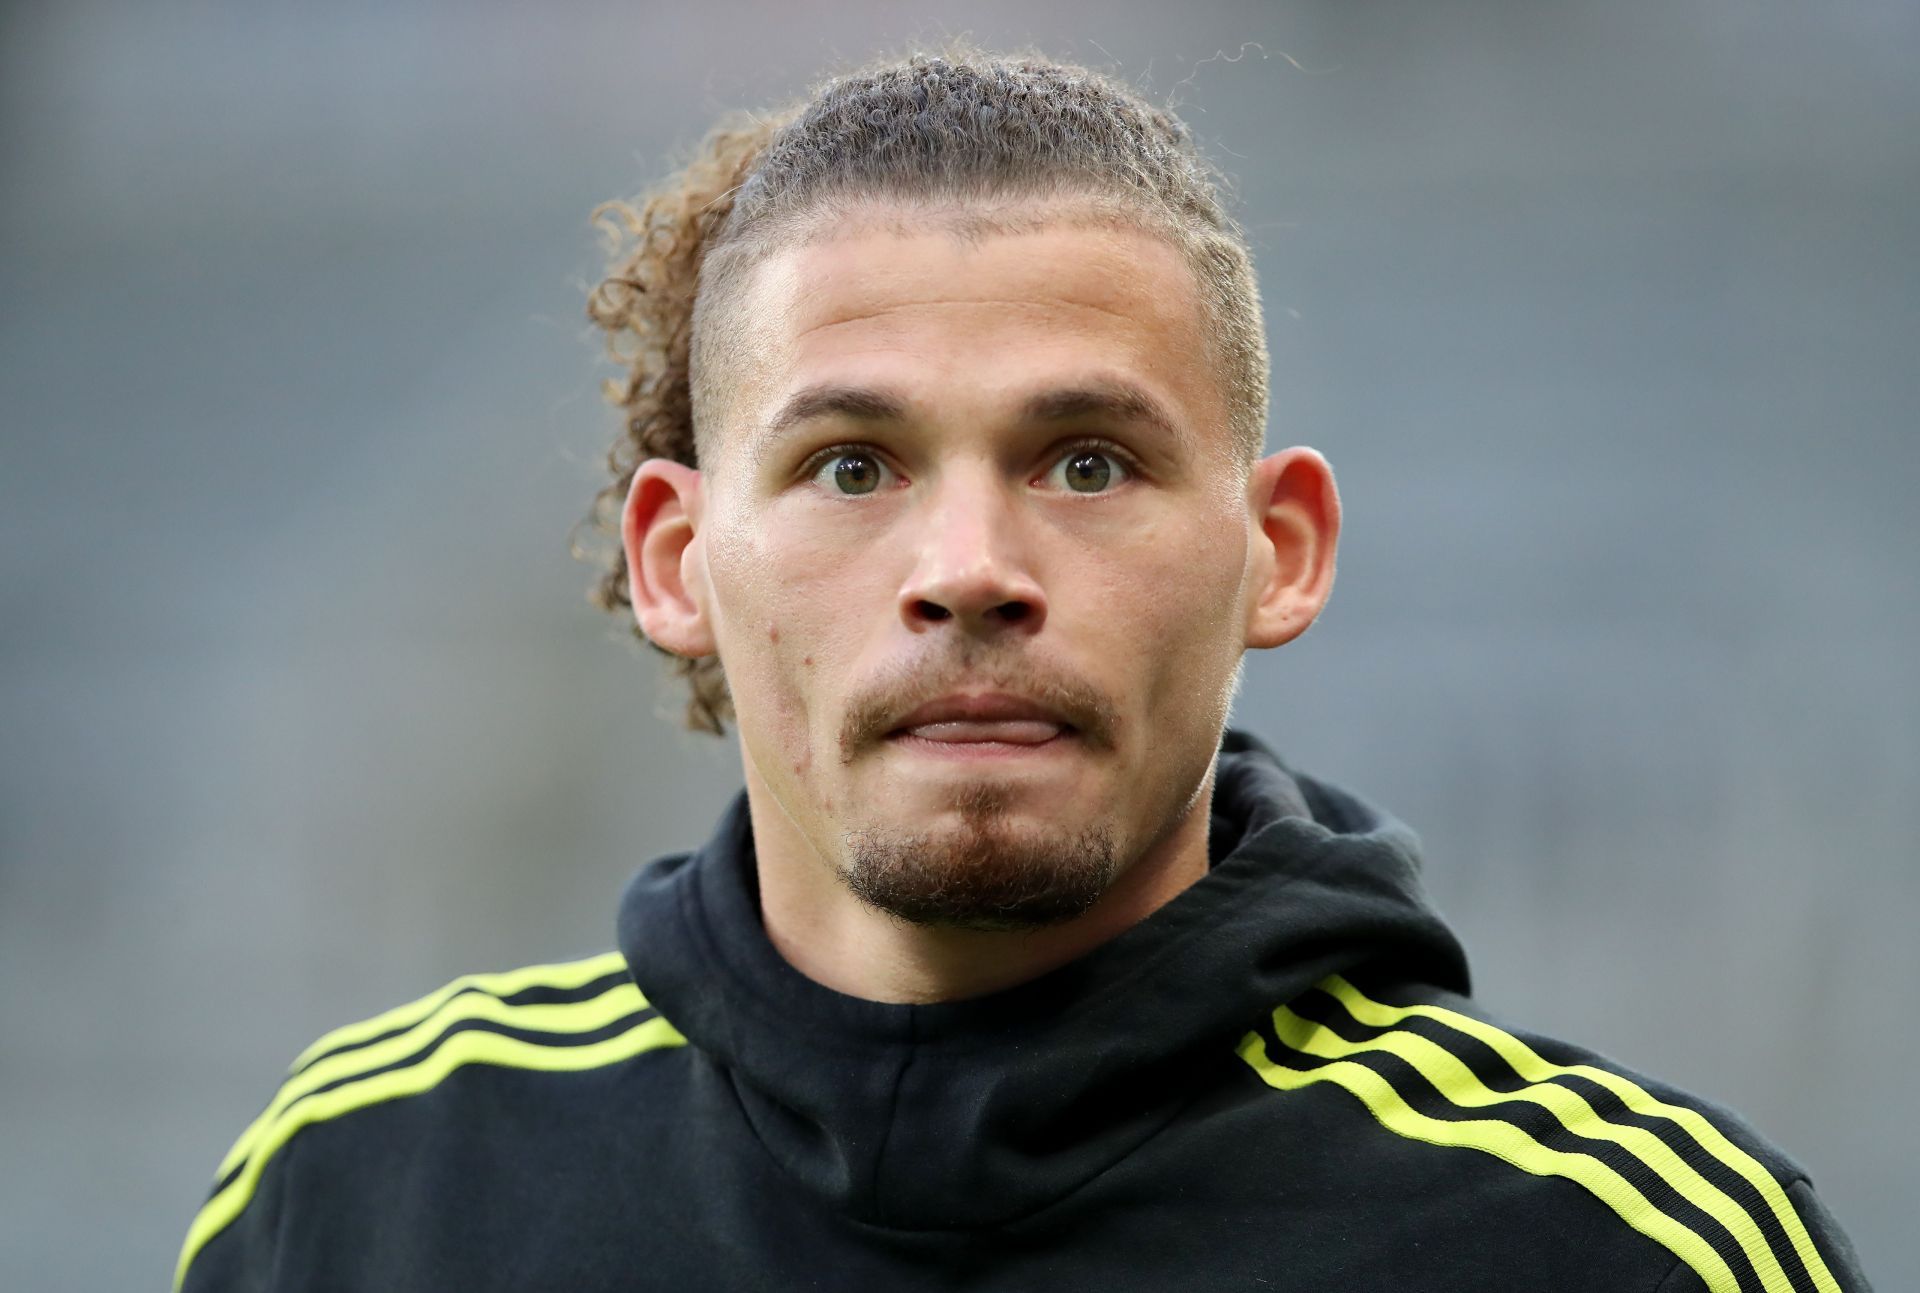 Manchester United are locked in a battle with Liverpool for Kalvin Phillips.